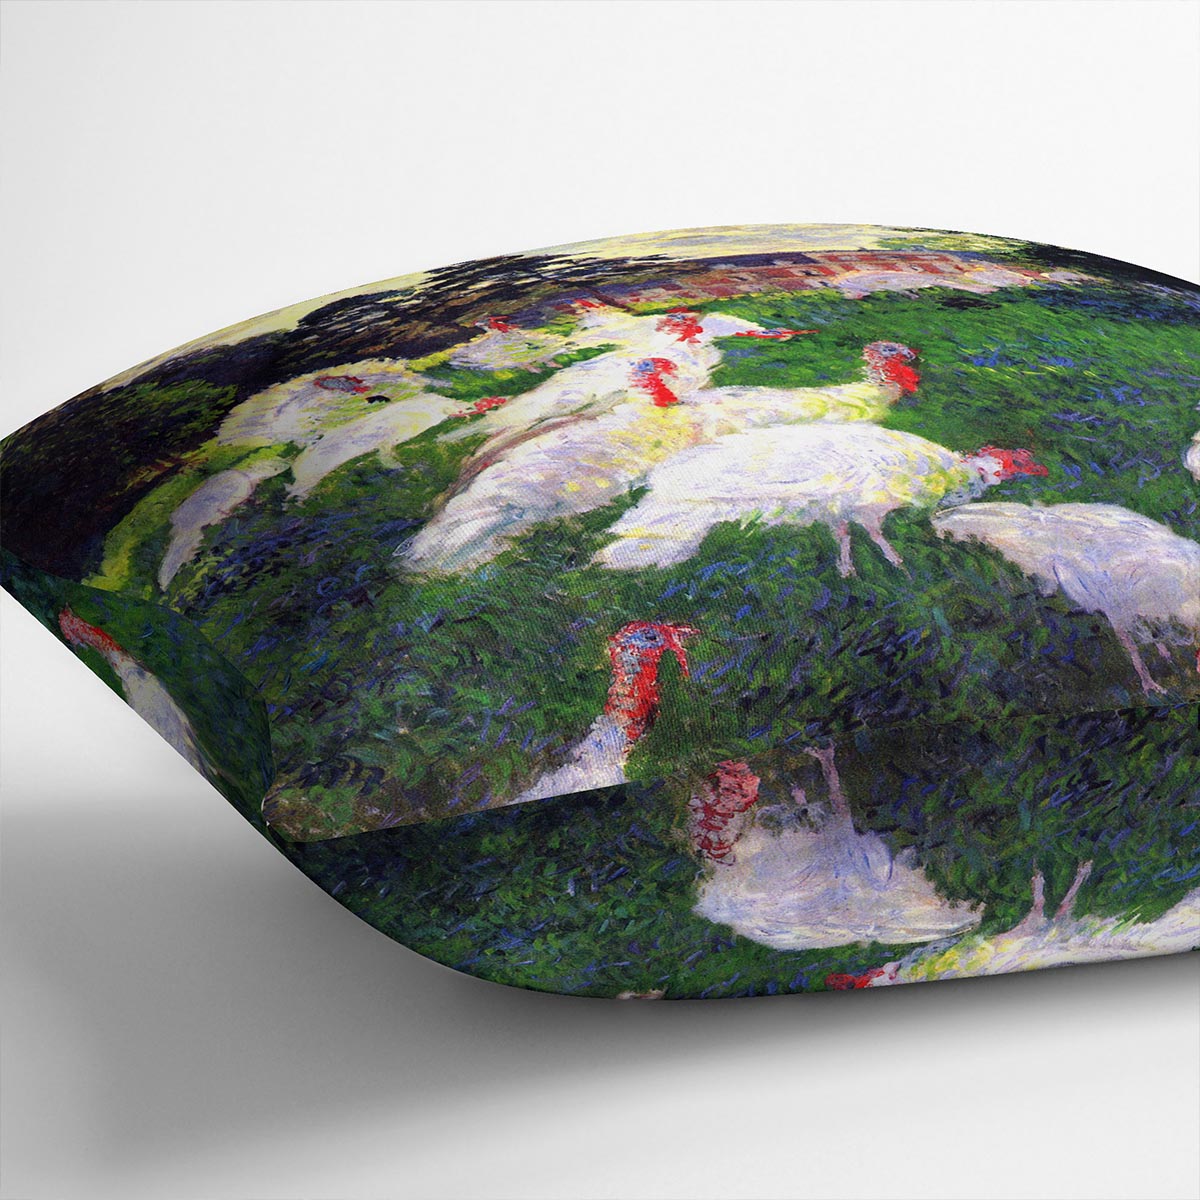 The Gobbler by Monet Cushion